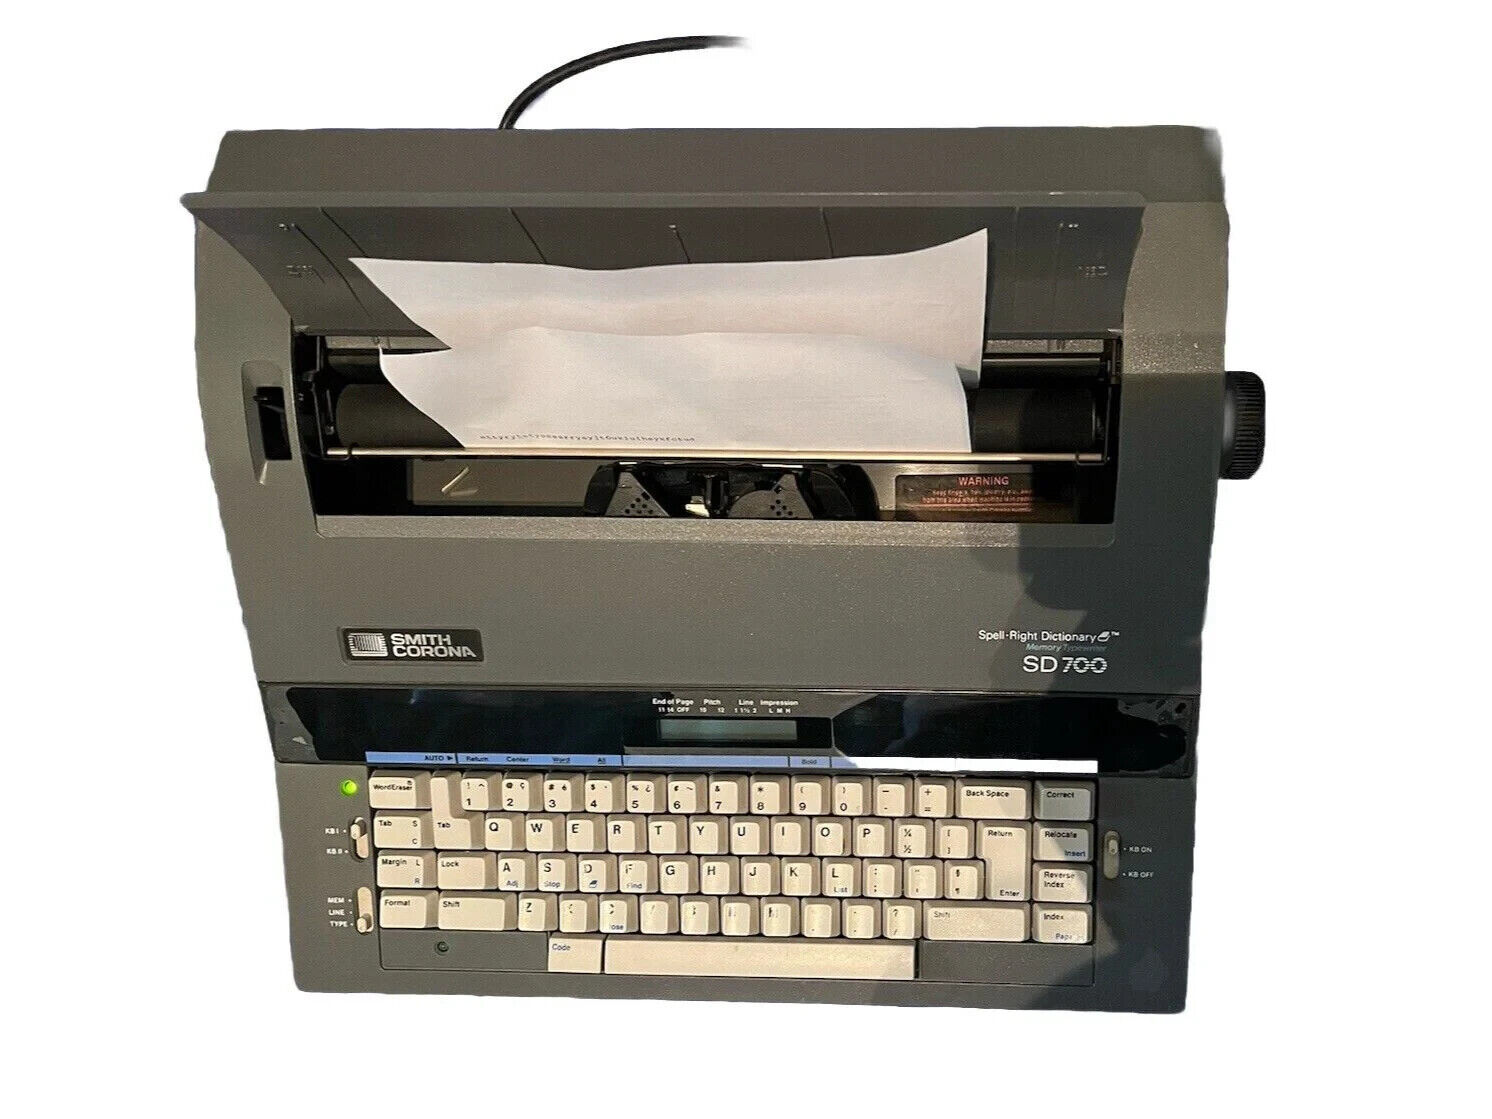 SMITH CORONA SD 700 5P - Electric Typewriter  Spell Right Dictionary Memory